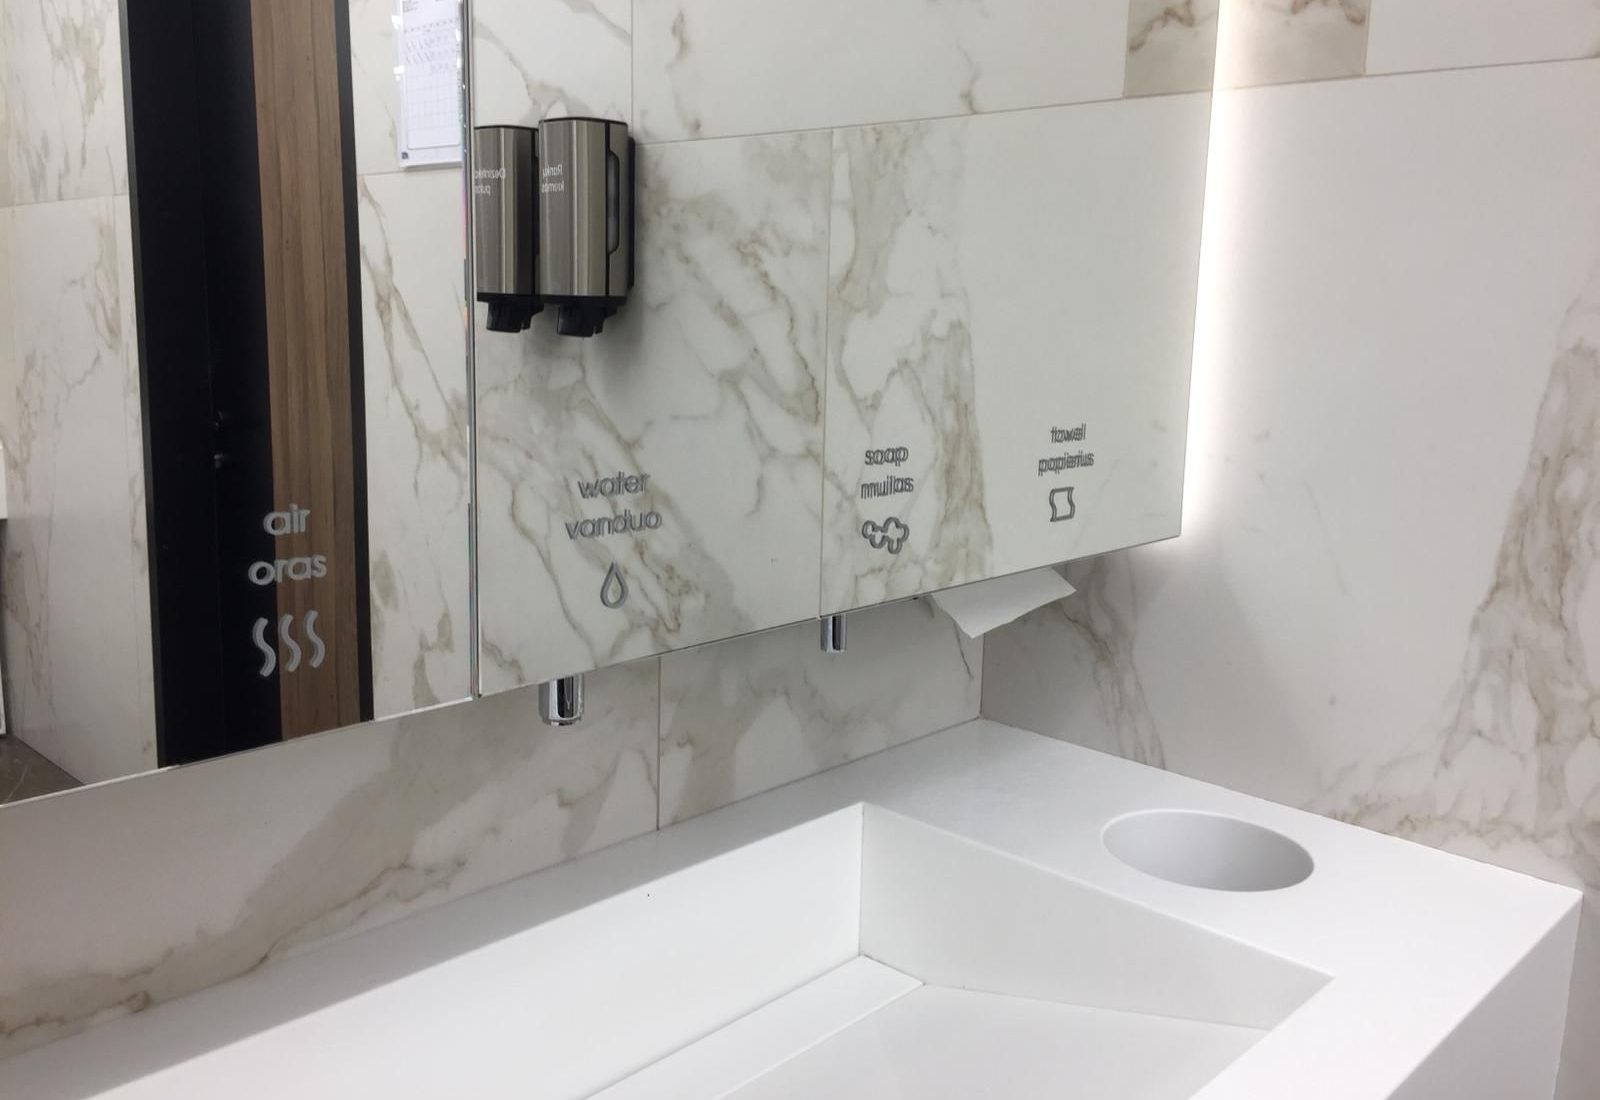 Behind the Mirror touch-free faucets, automatic soap dispensers, high-speed hand dryers and paper towel dispensers